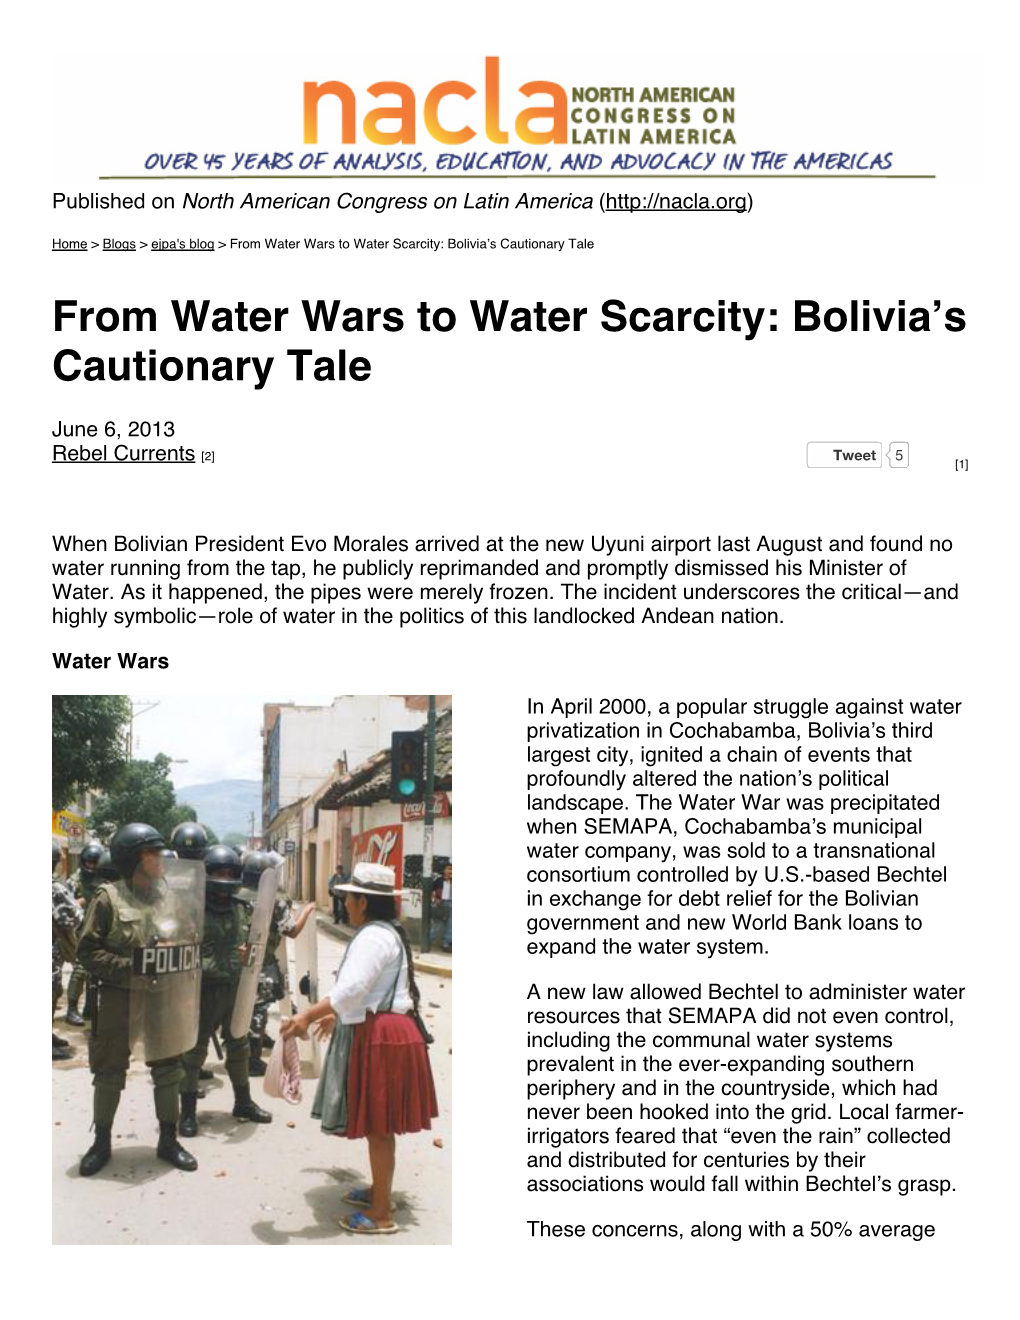 From Water Wars to Water Scarcity: Bolivia's Cautionary Tale